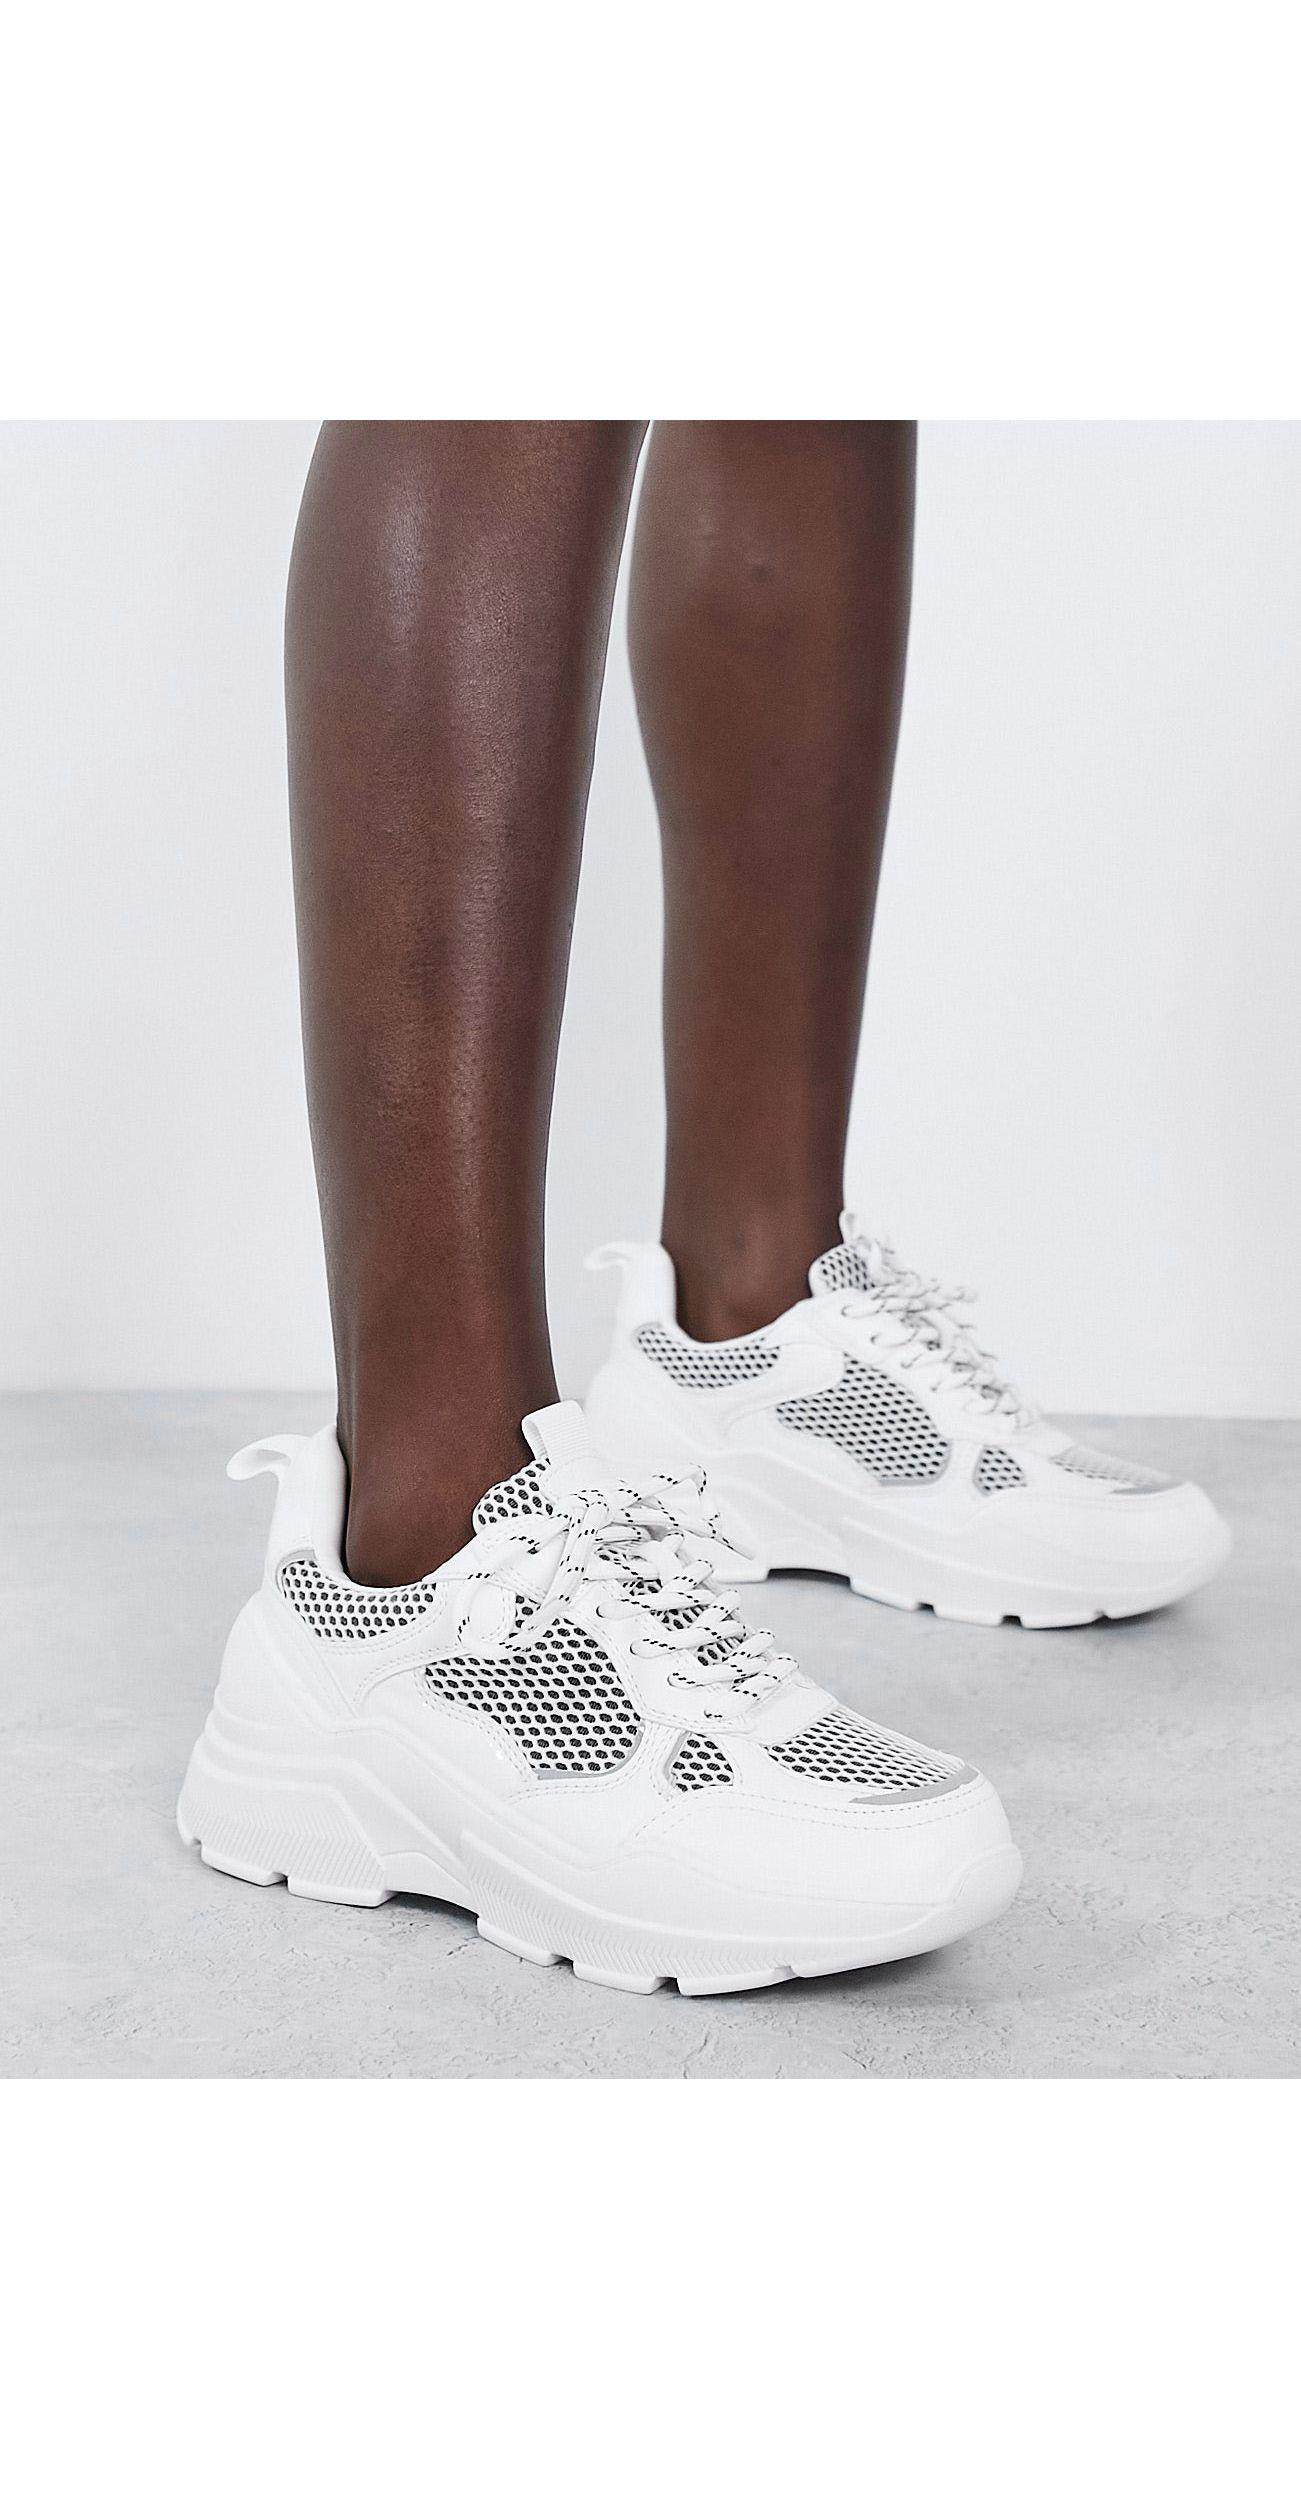 London Rebel chunky sneakers in black and white